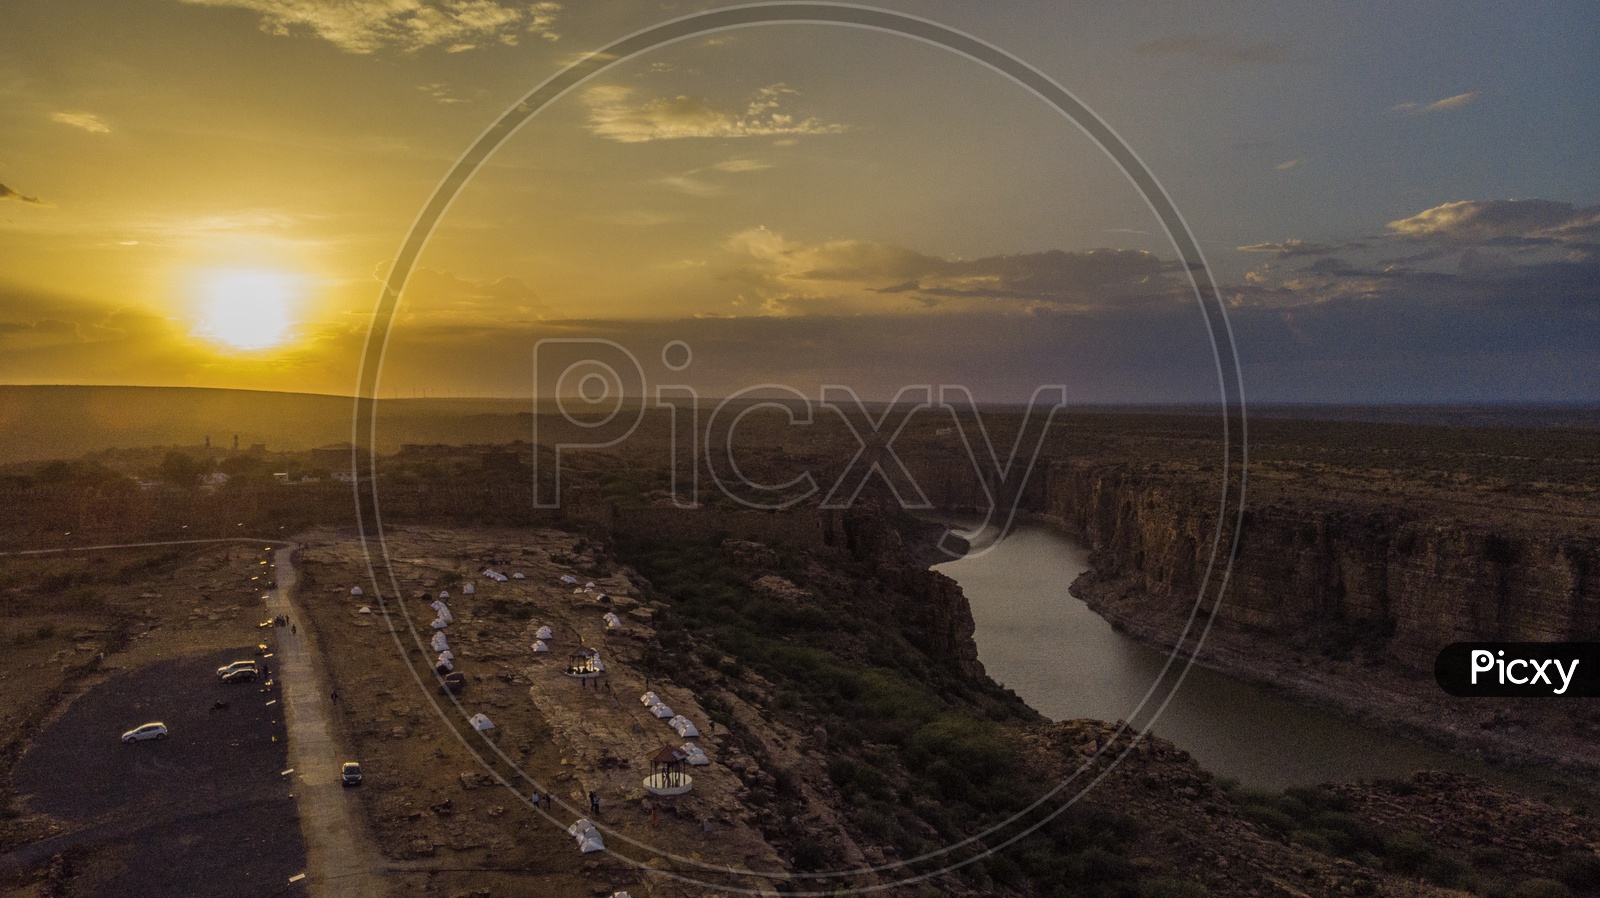 Gandikota and the Camping site